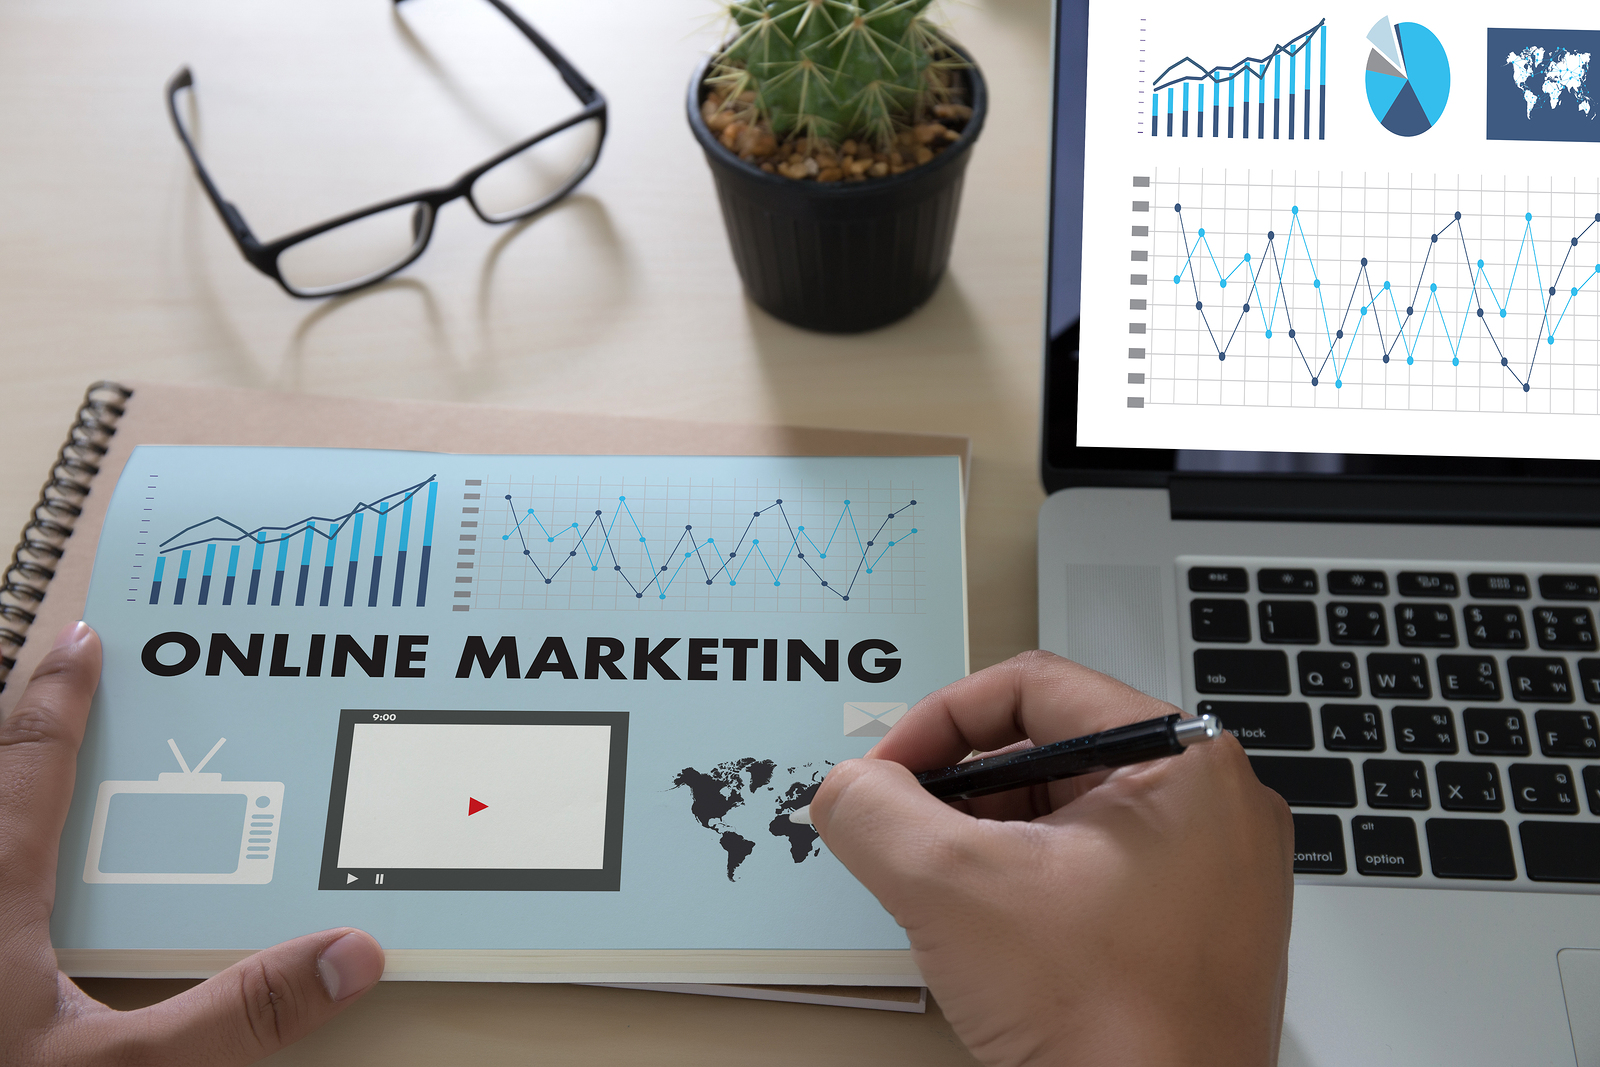 Online Marketing Melbourne: The perfection of service can fetch more business for you